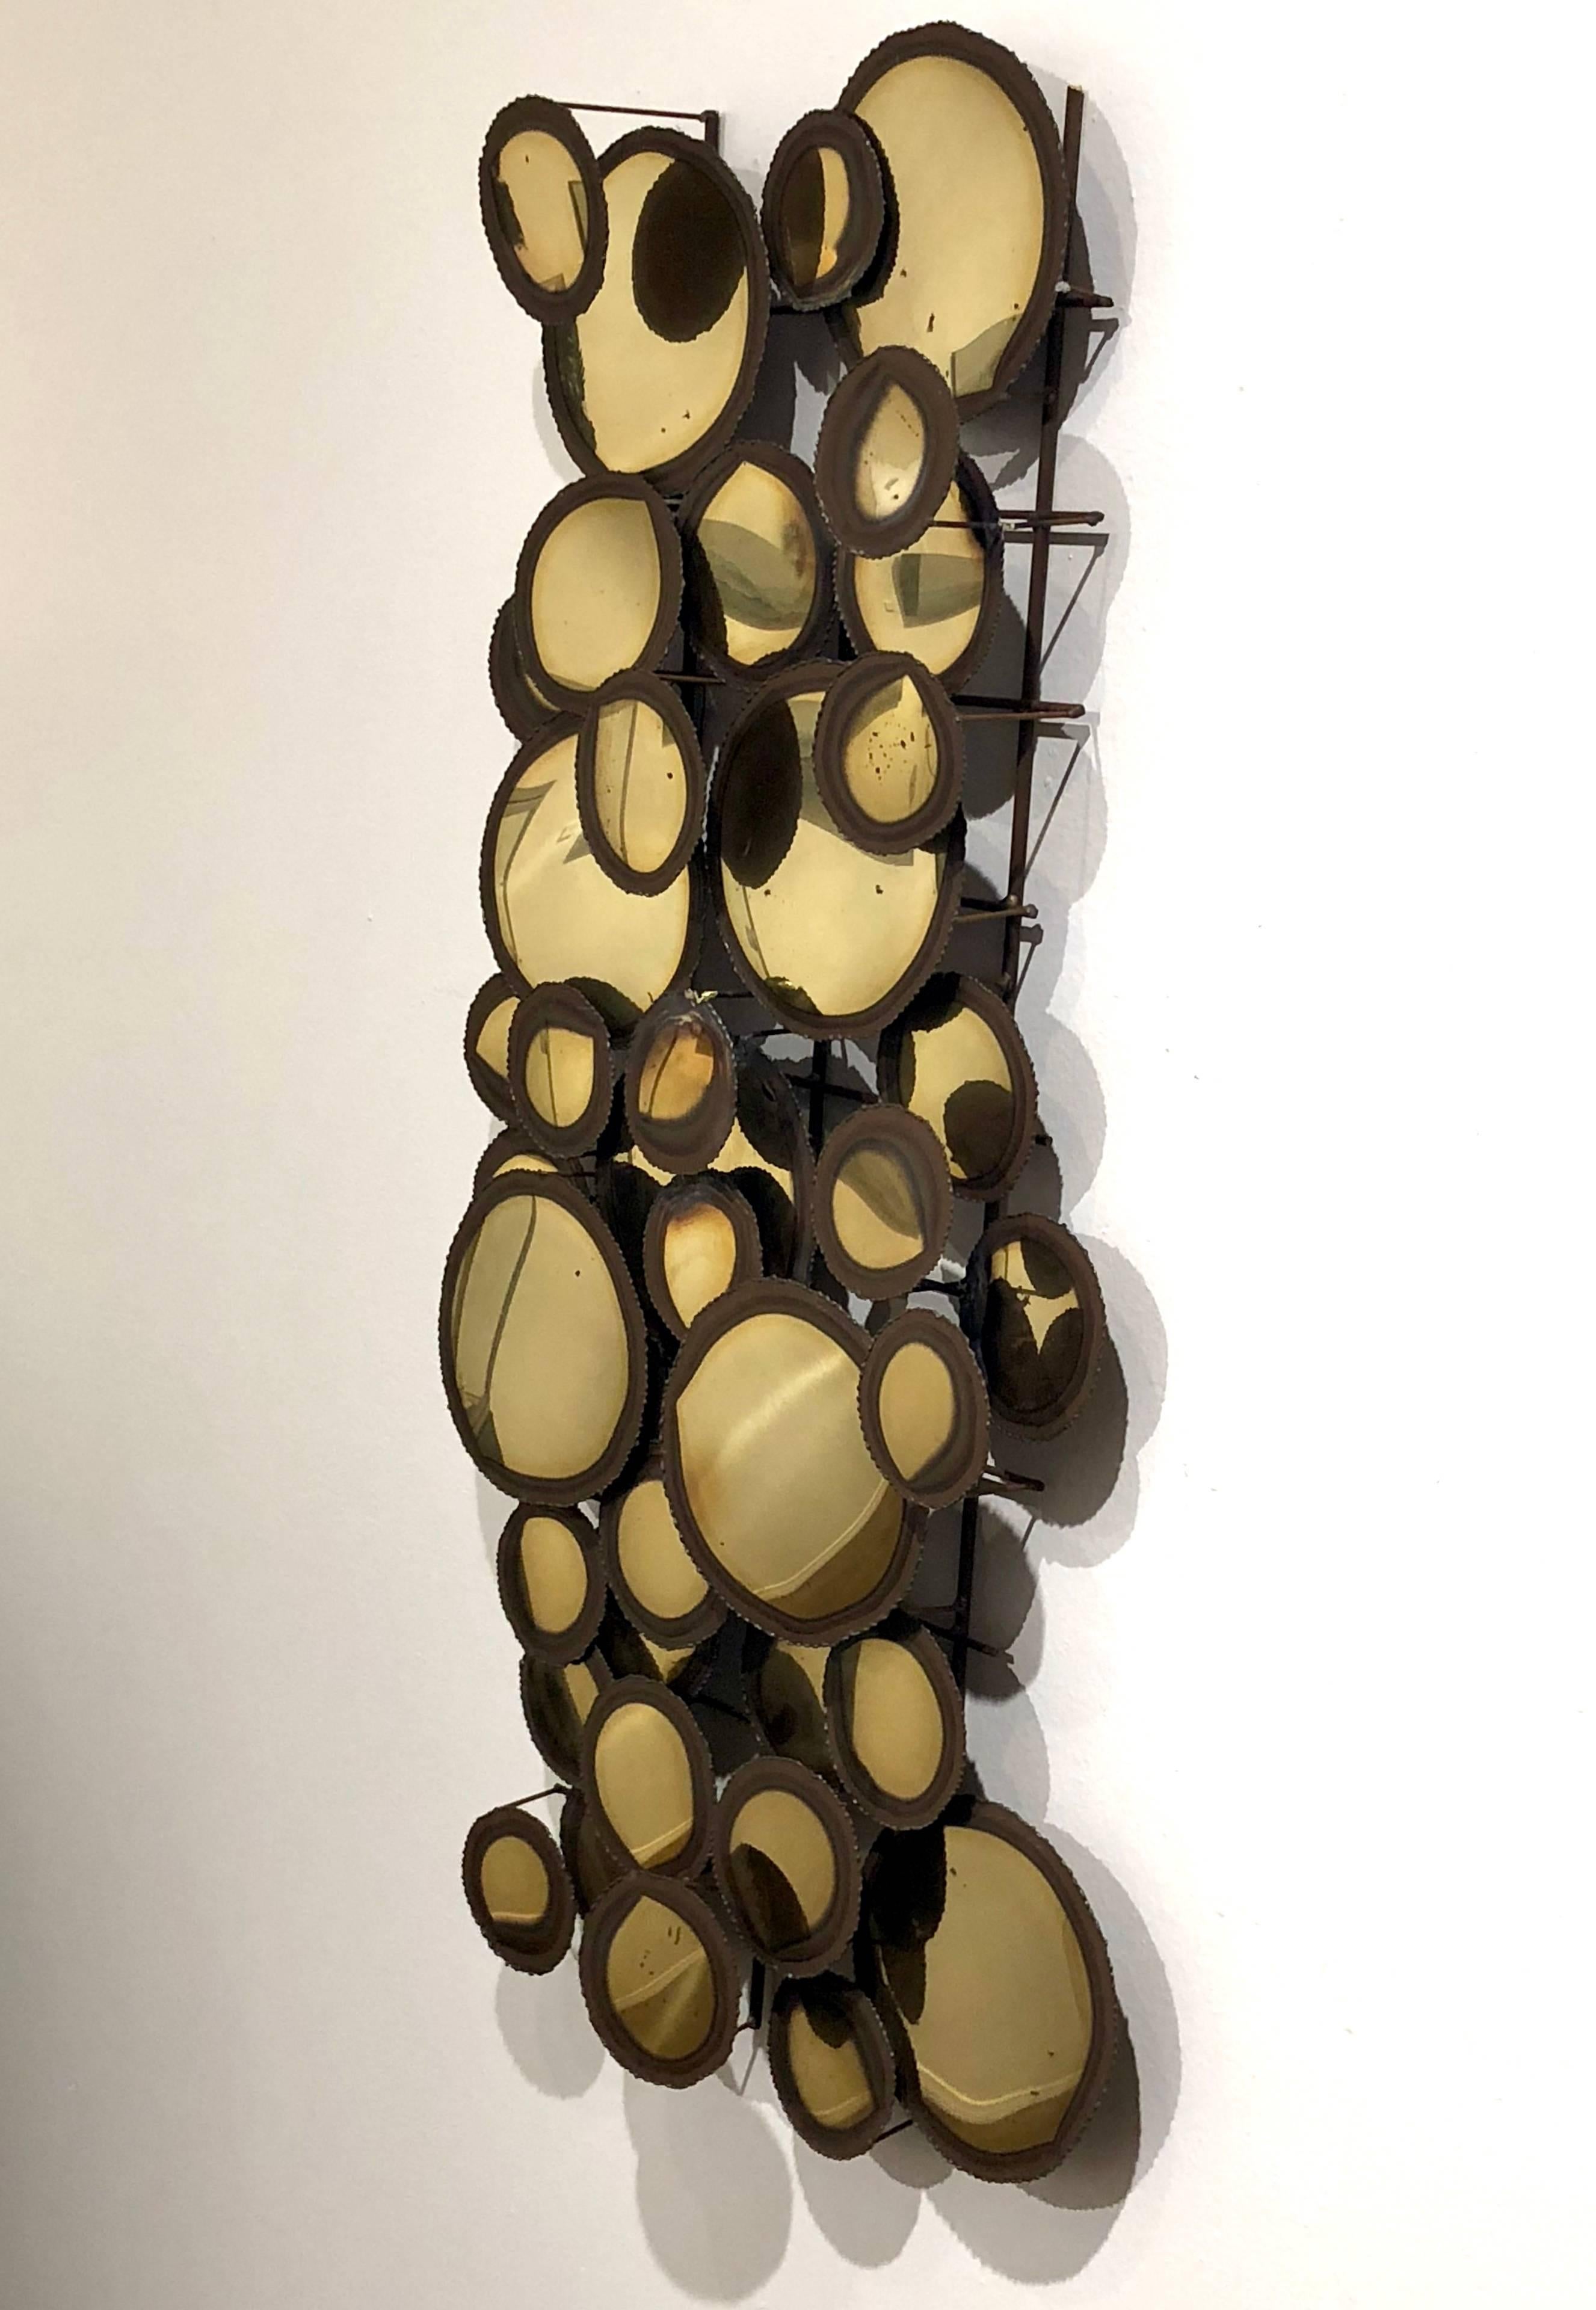 American Striking Brass Wall Sculpture Raindrops Style after Curtis Jere